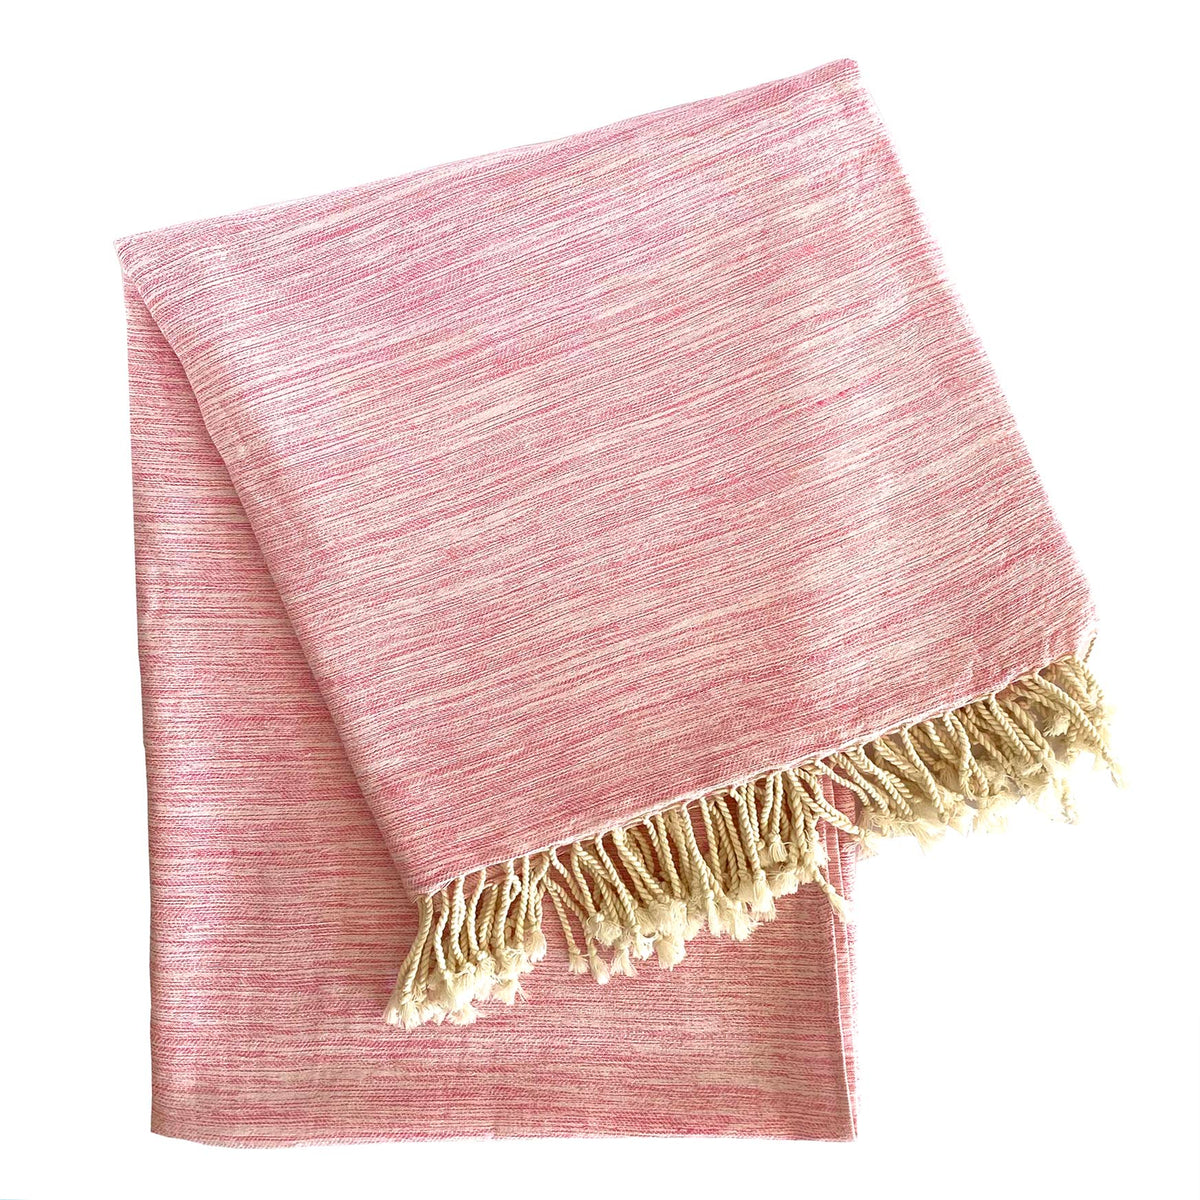 Yalova Ultra Soft Marbled Blanket Throw Pink by Hilana Upcycled Cotton